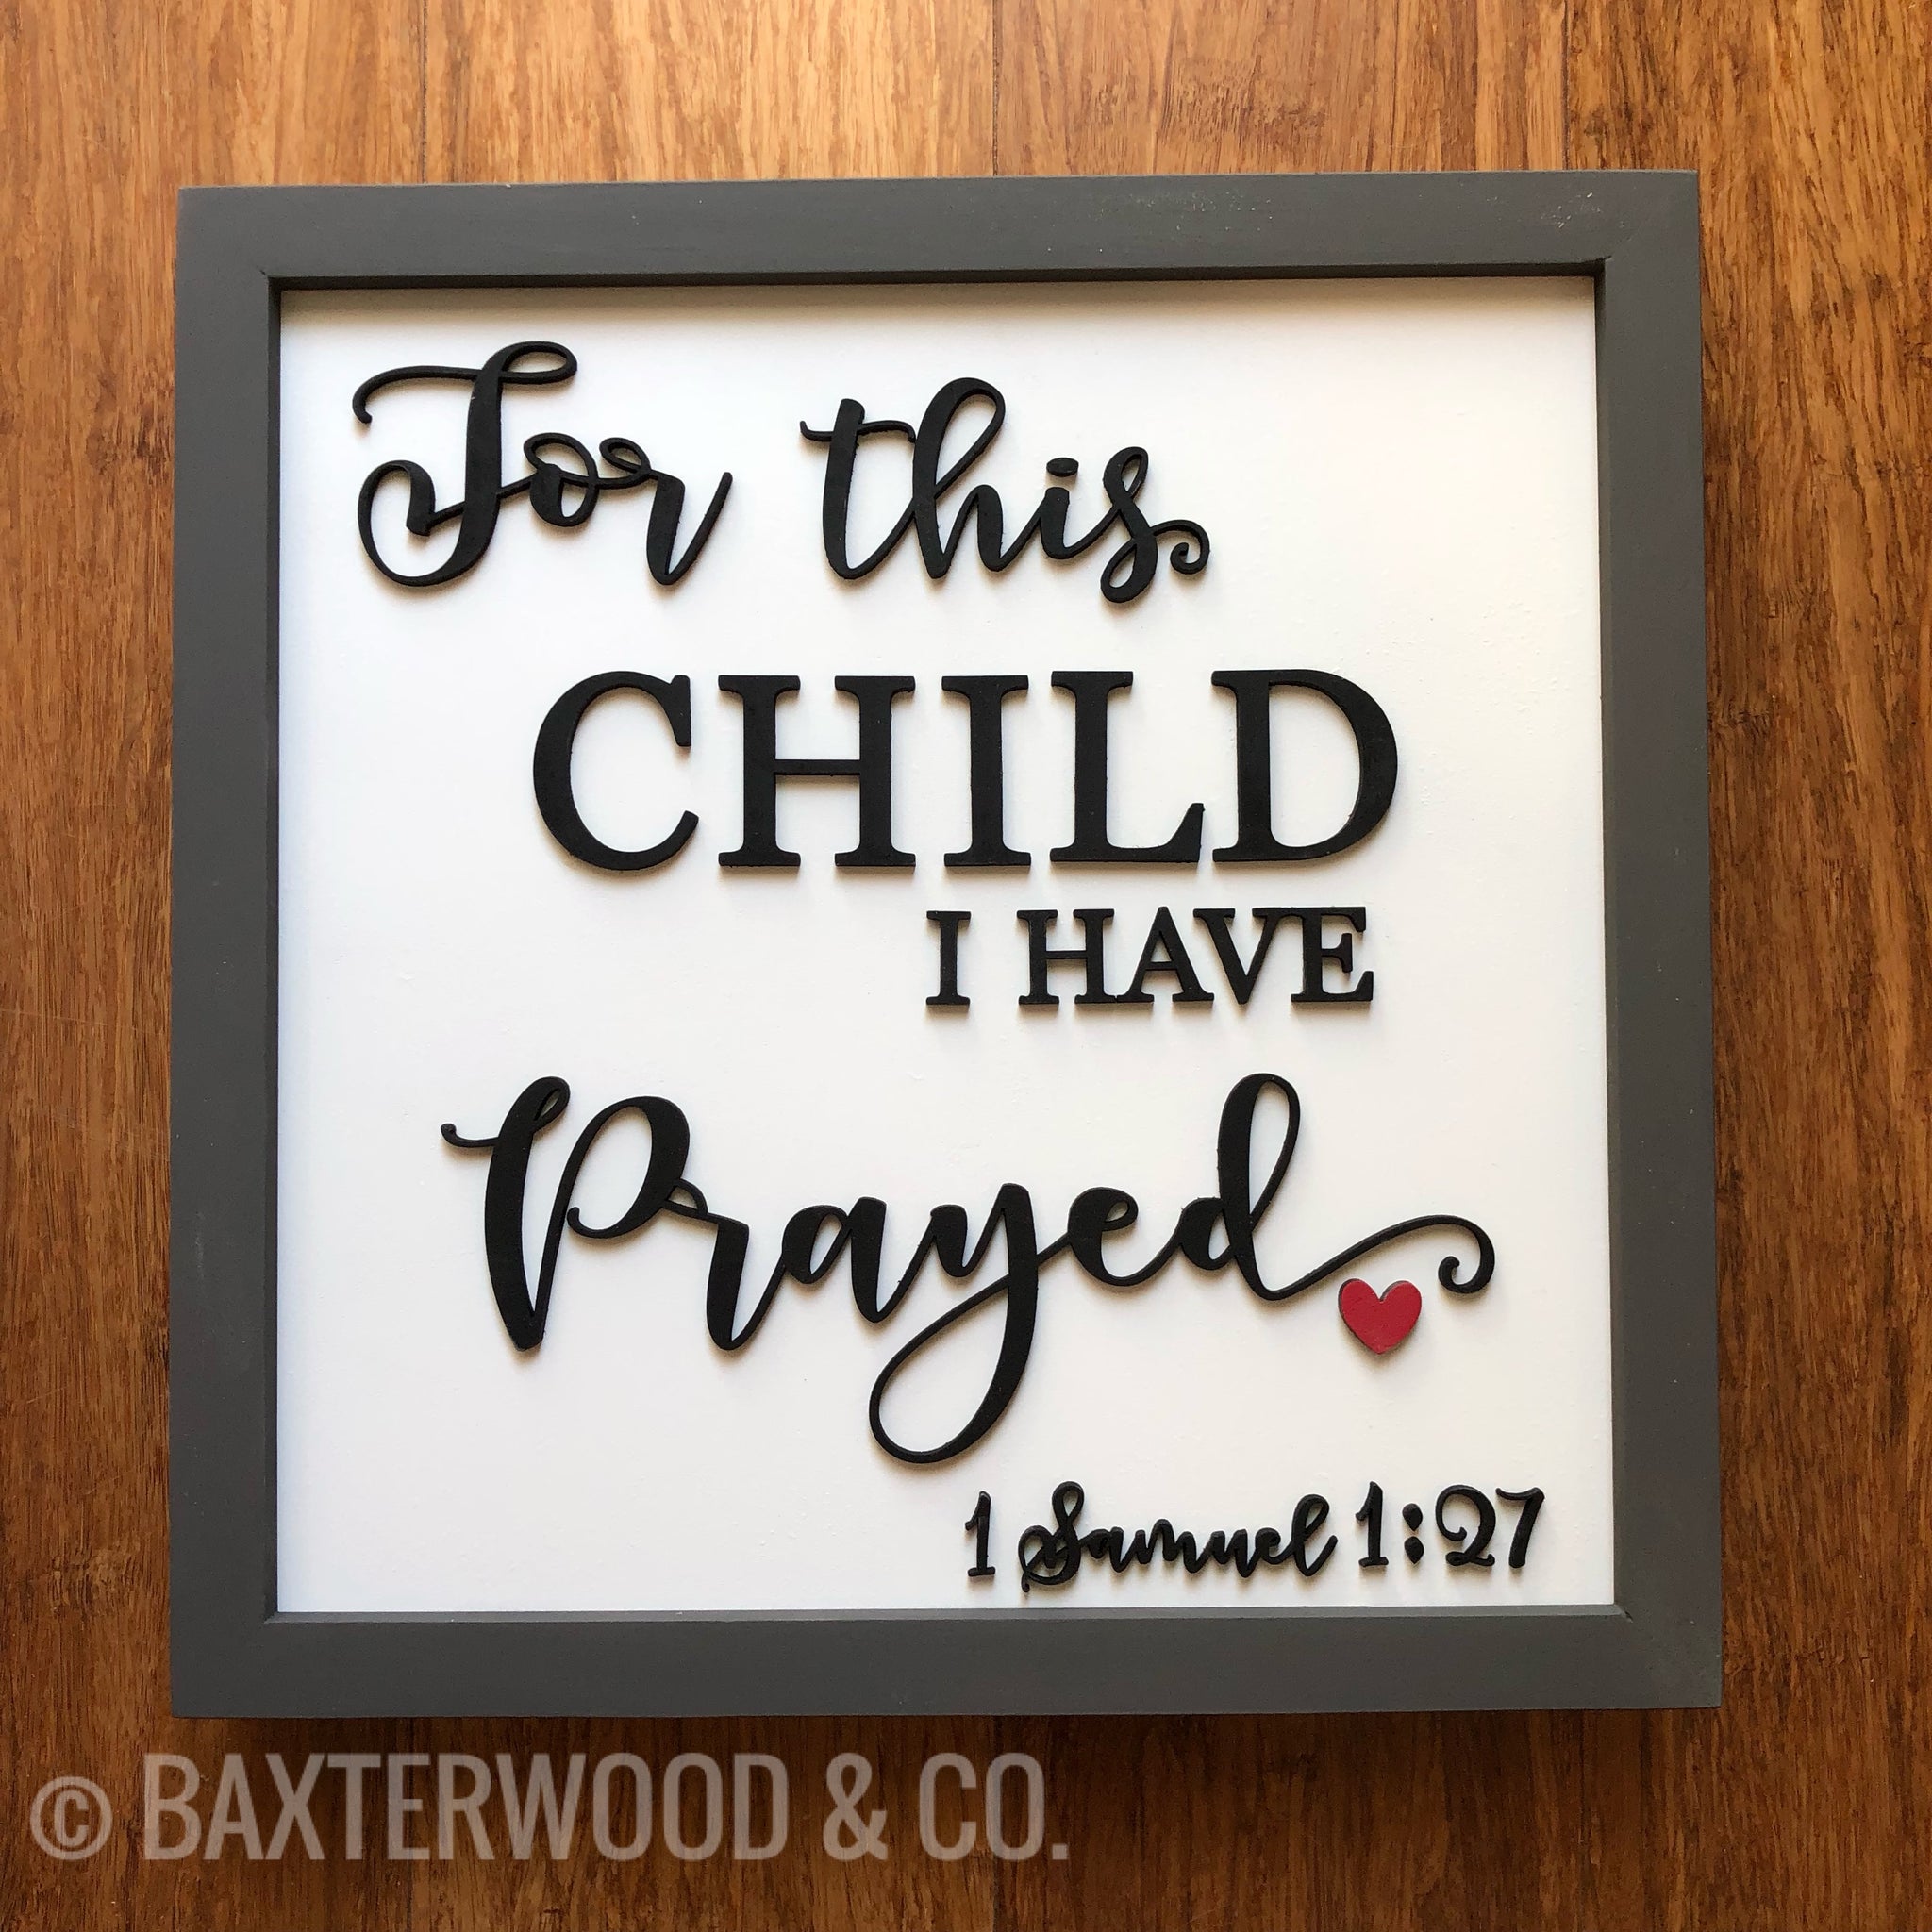 FOR THIS CHILD I HAVE PRAYED - 1 SAMUEL 1:27